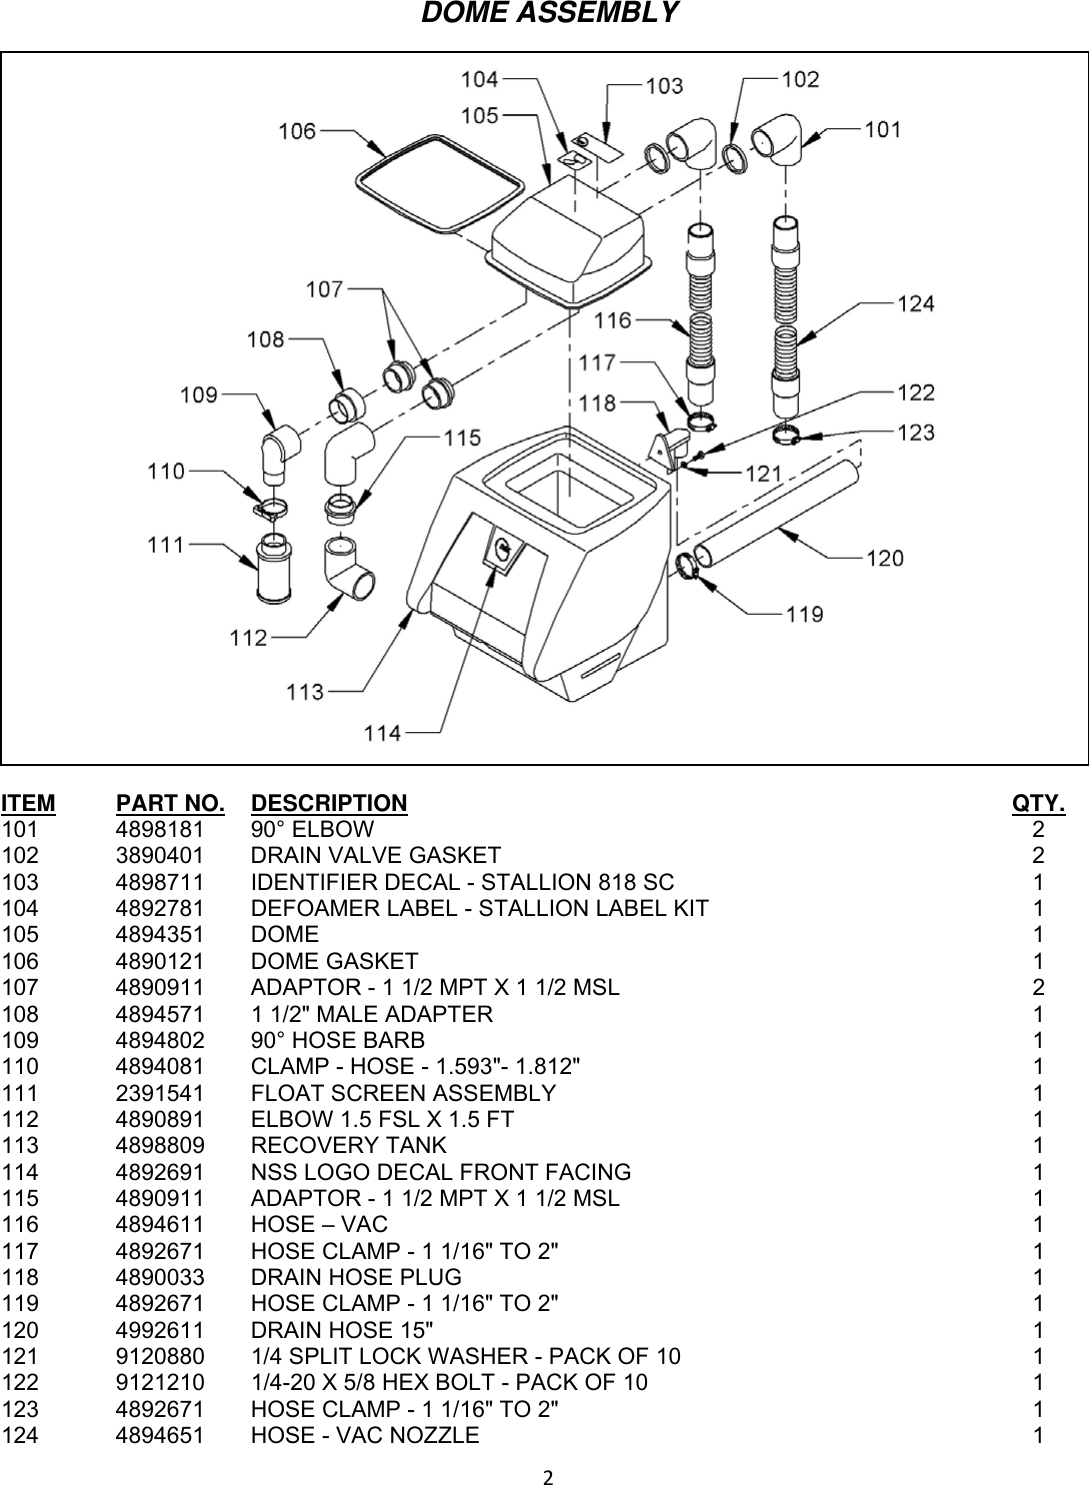 Page 2 of 12 - 9094818 Stallion 818 SC Illustrated Parts Book  Nss-stallion-818sc-carpet-extractor-parts-manual